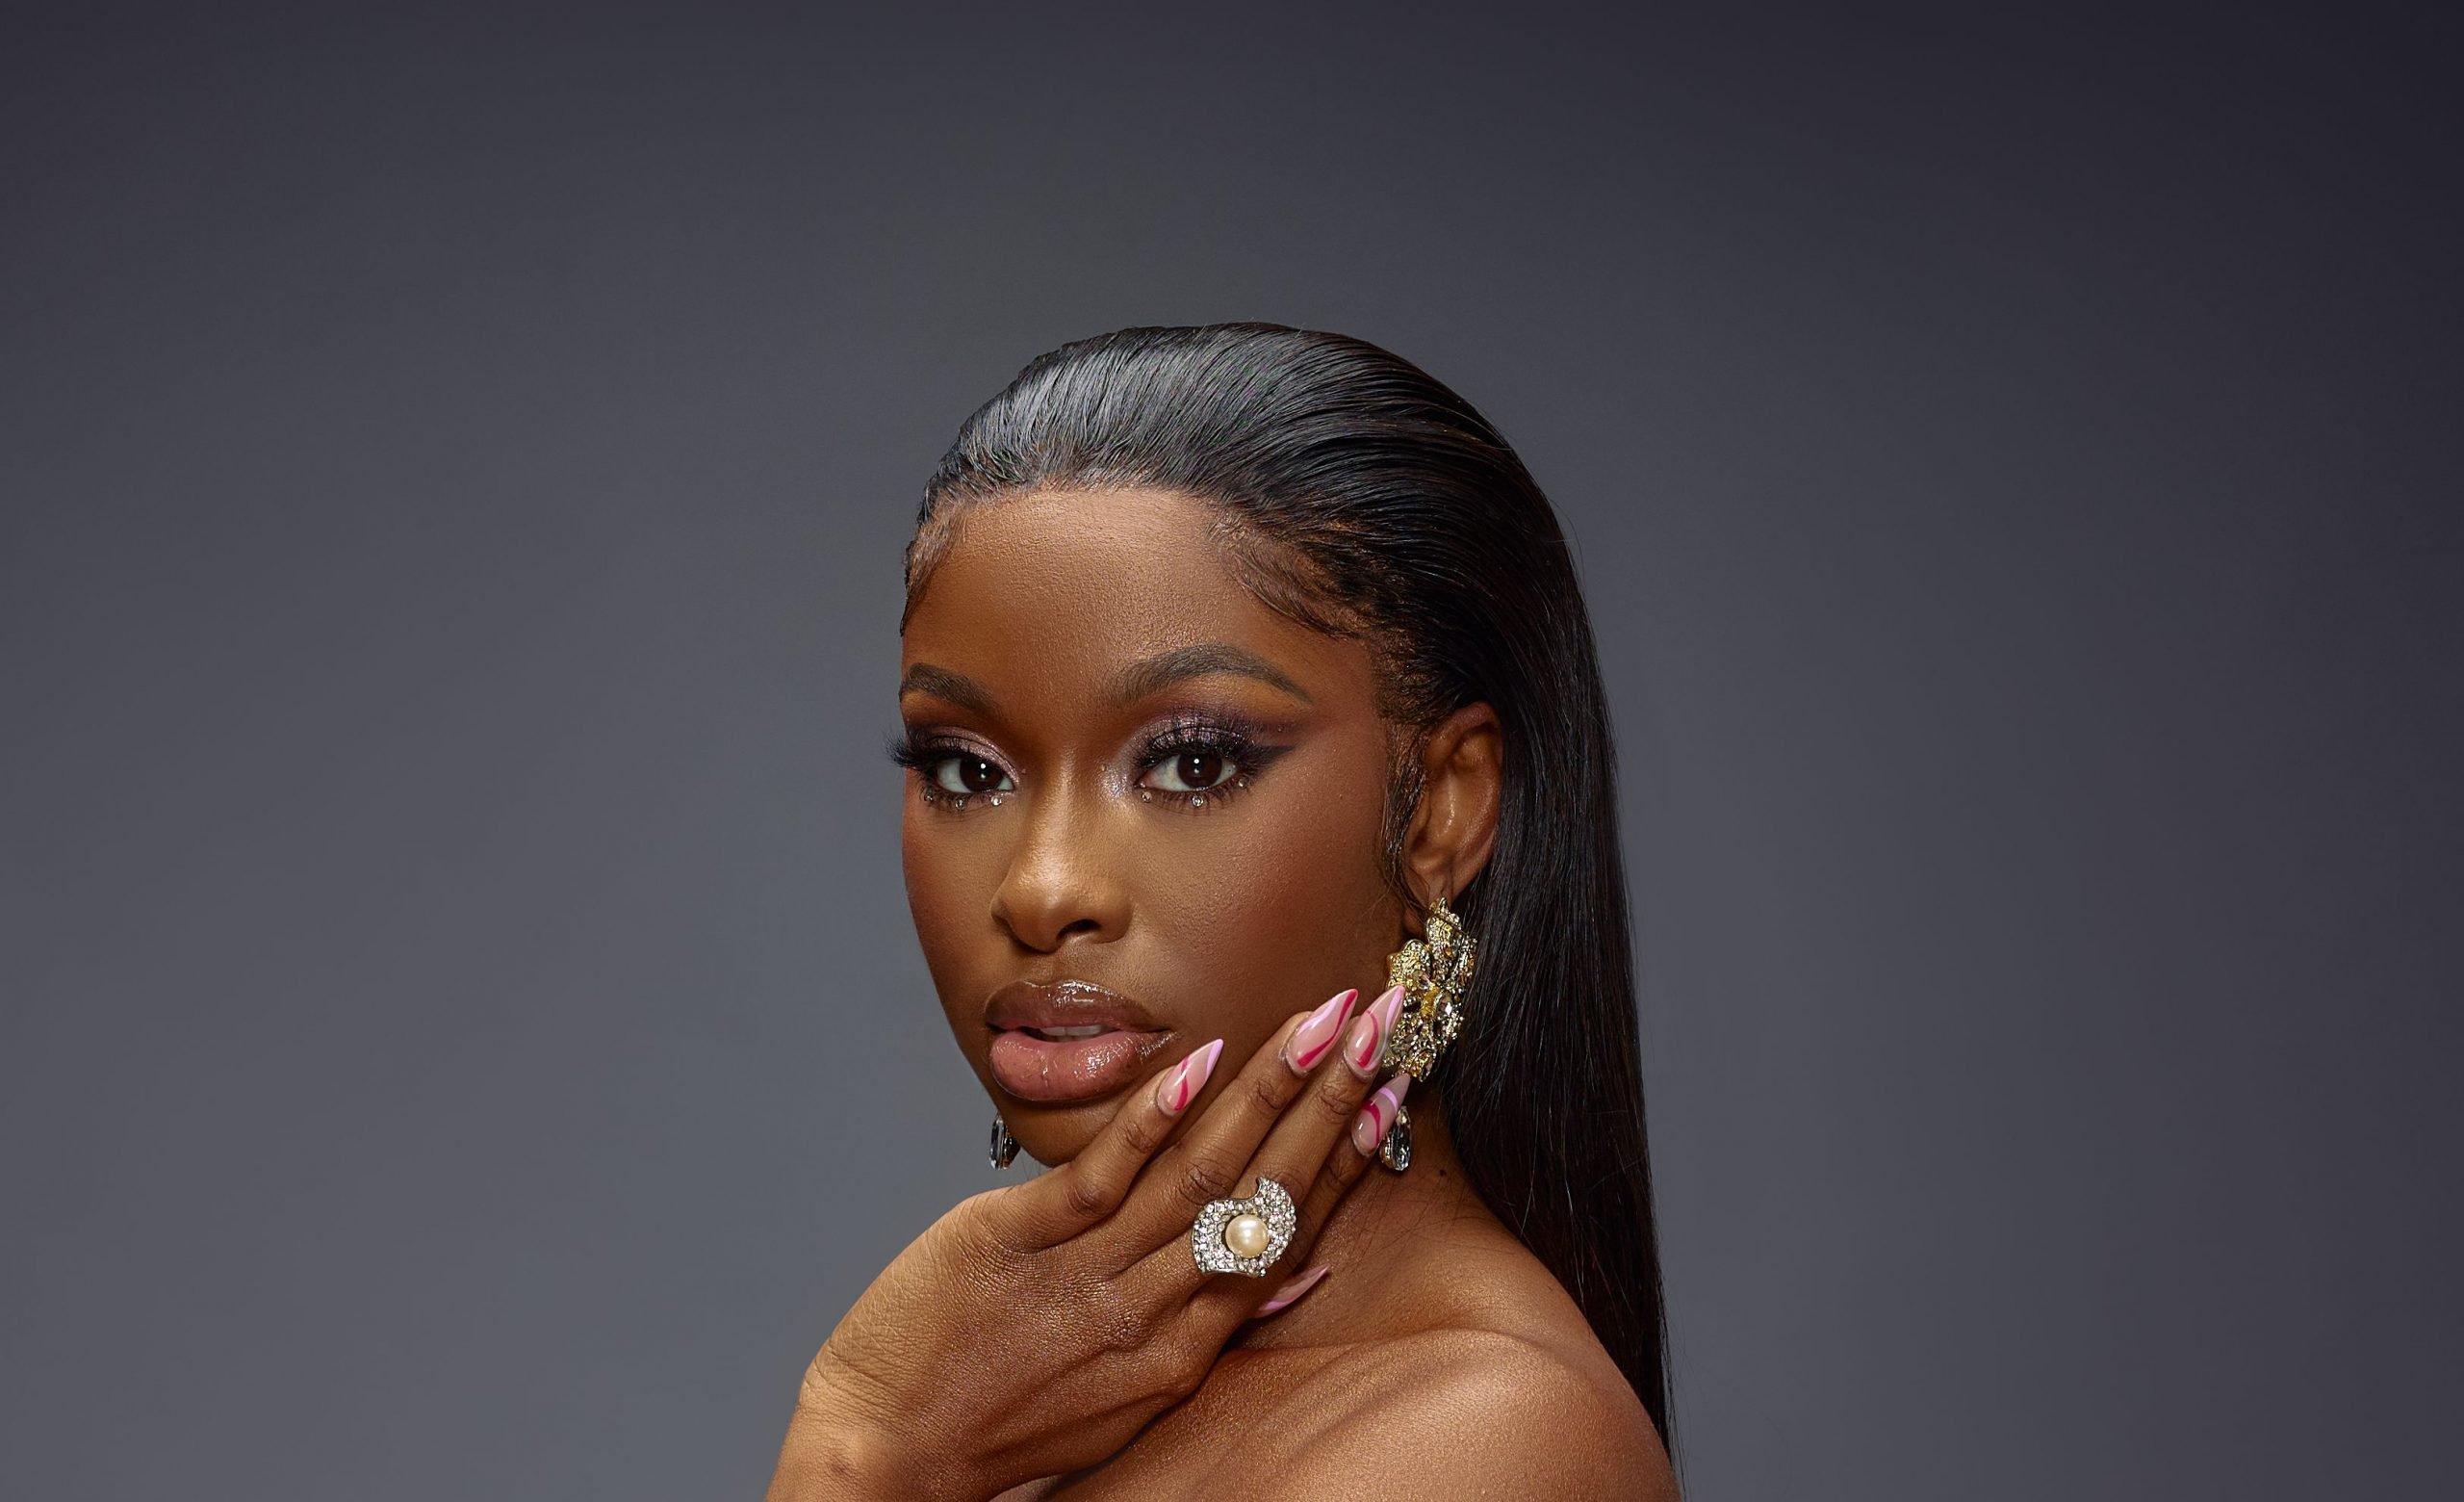 COCO JONES RELEASES “CALIBER” NEW SINGLE AVAILABLE TODAY VIA HIGH